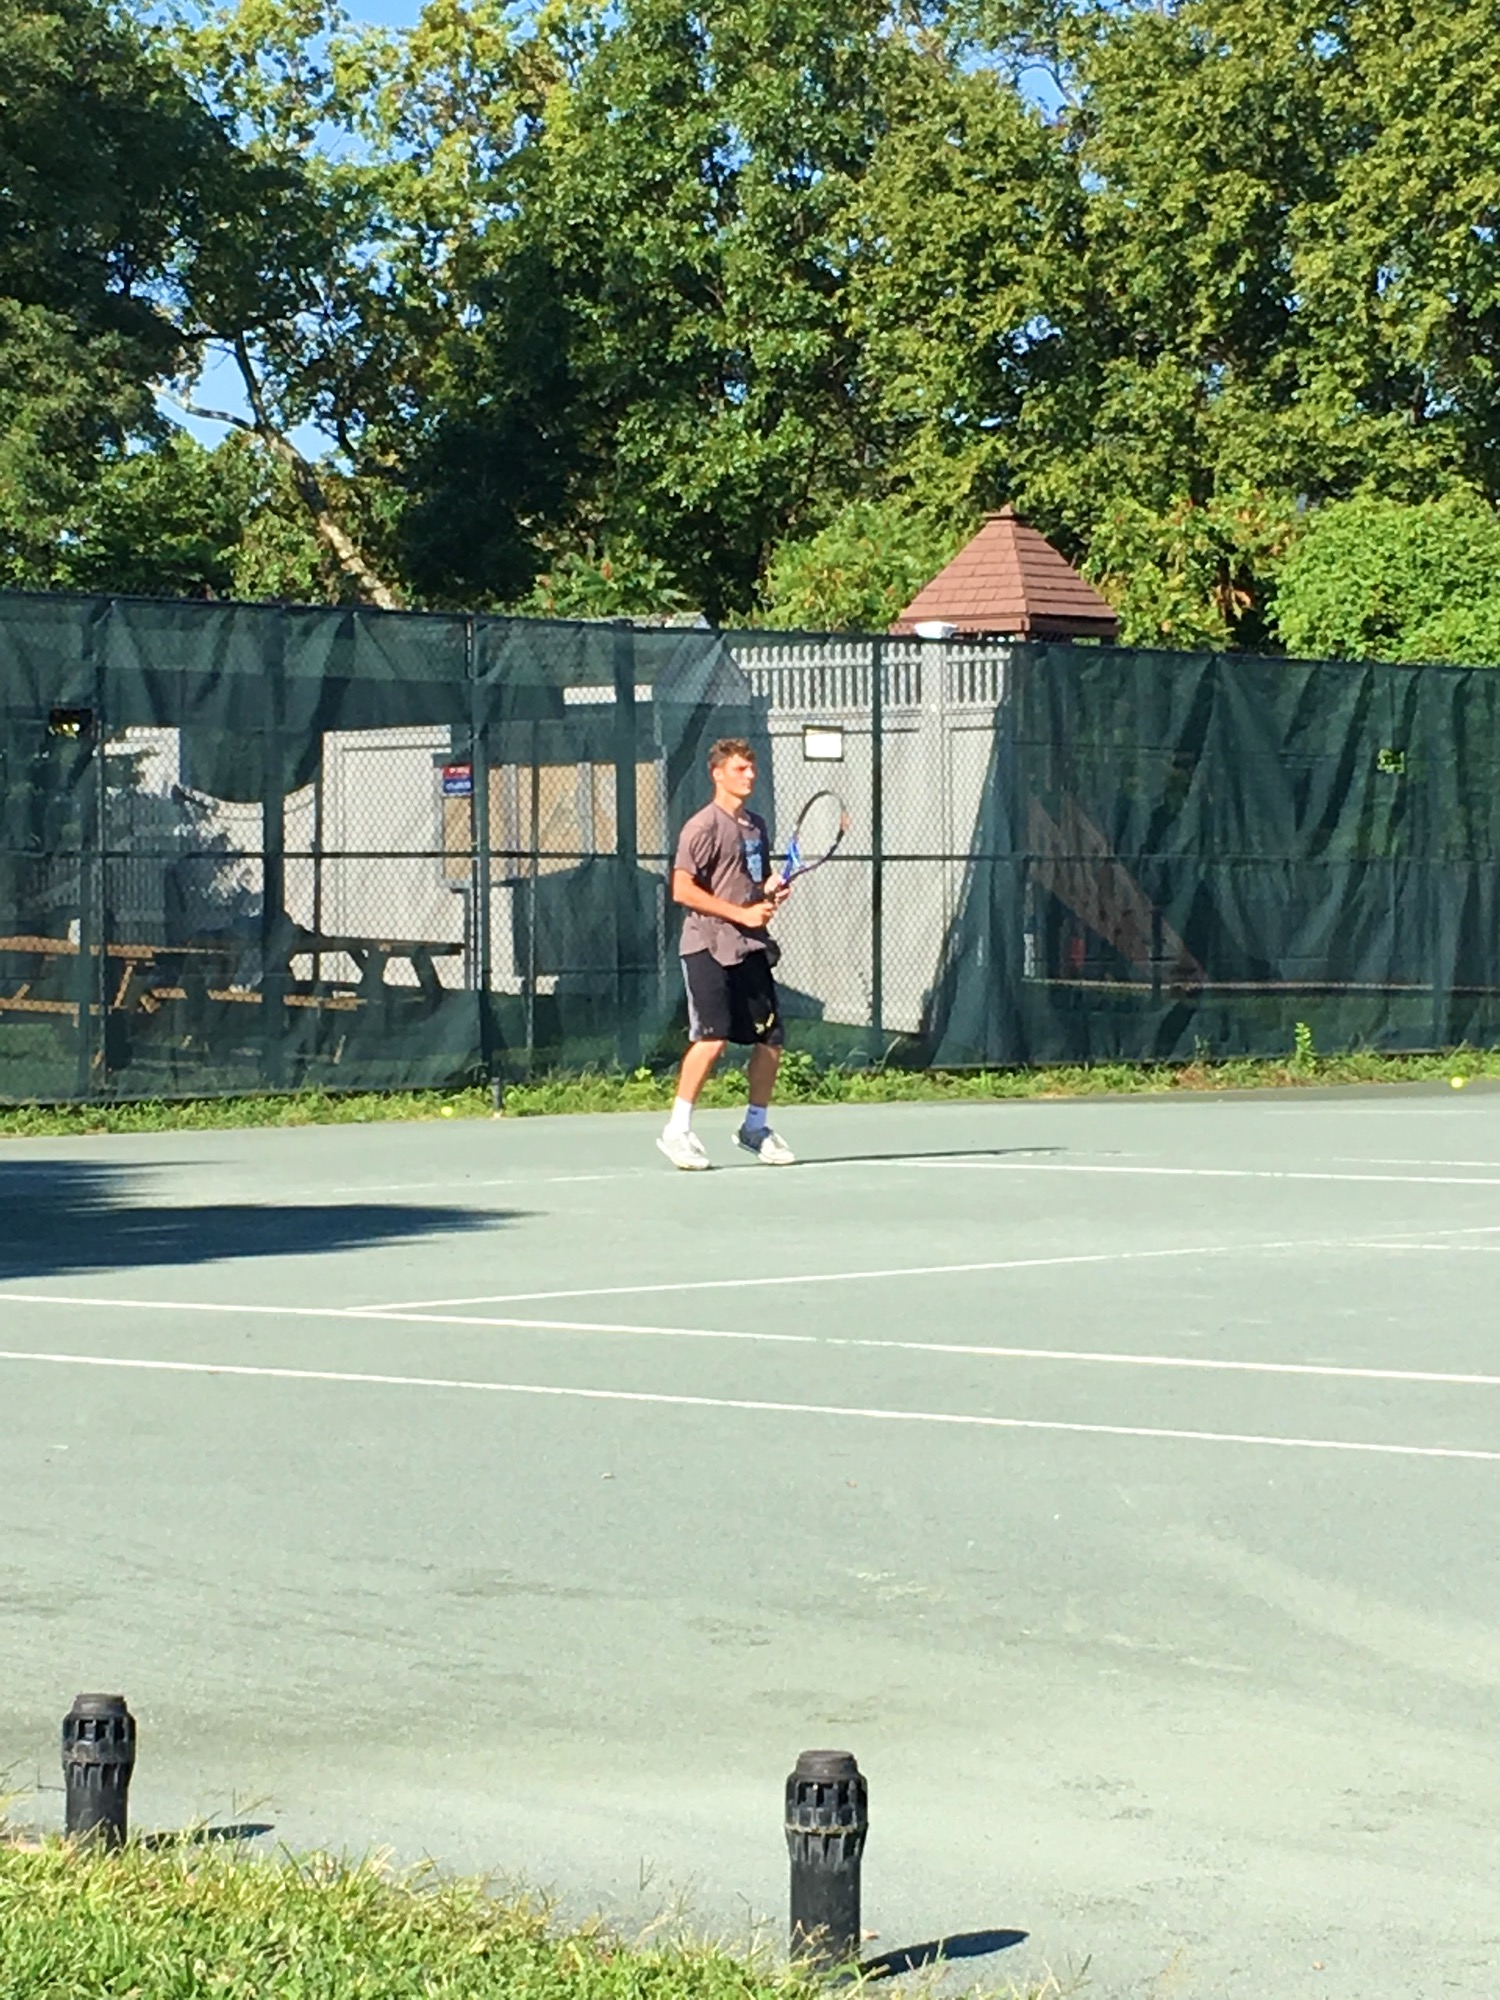 Philip D. teaches tennis lessons in Quincy, MA